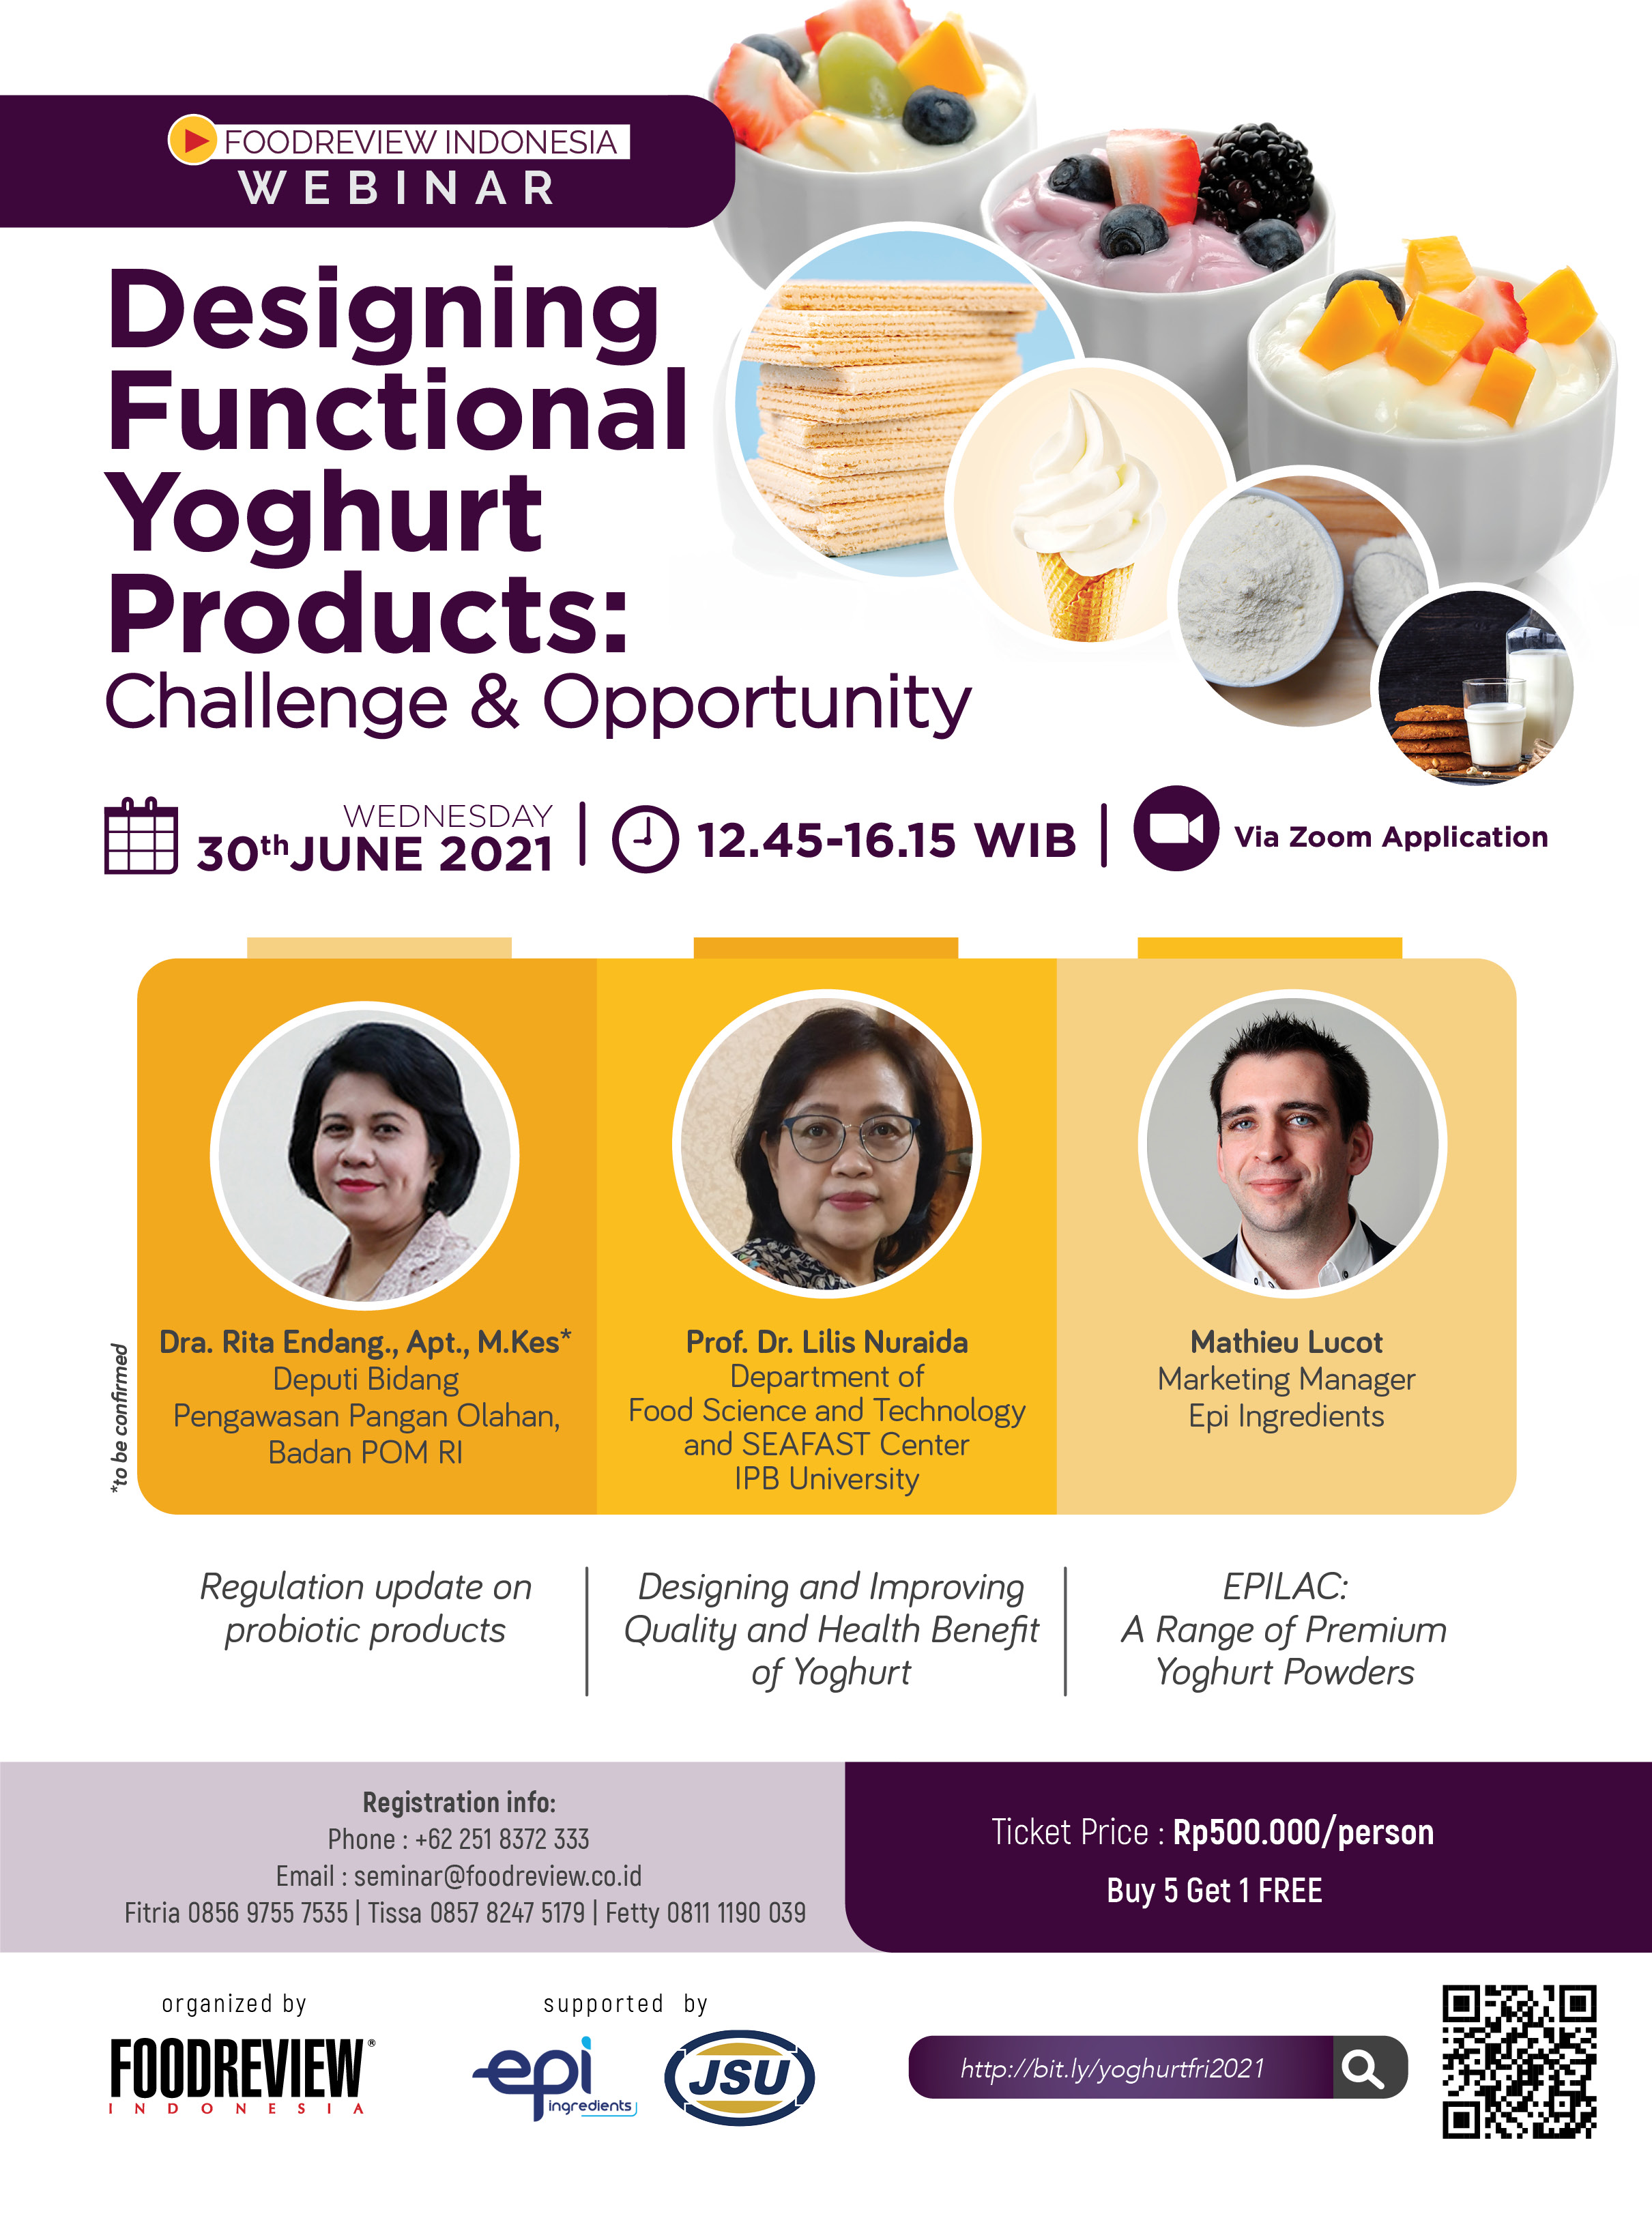 Designing Functional Yoghurt Products: Challange & Opportunity